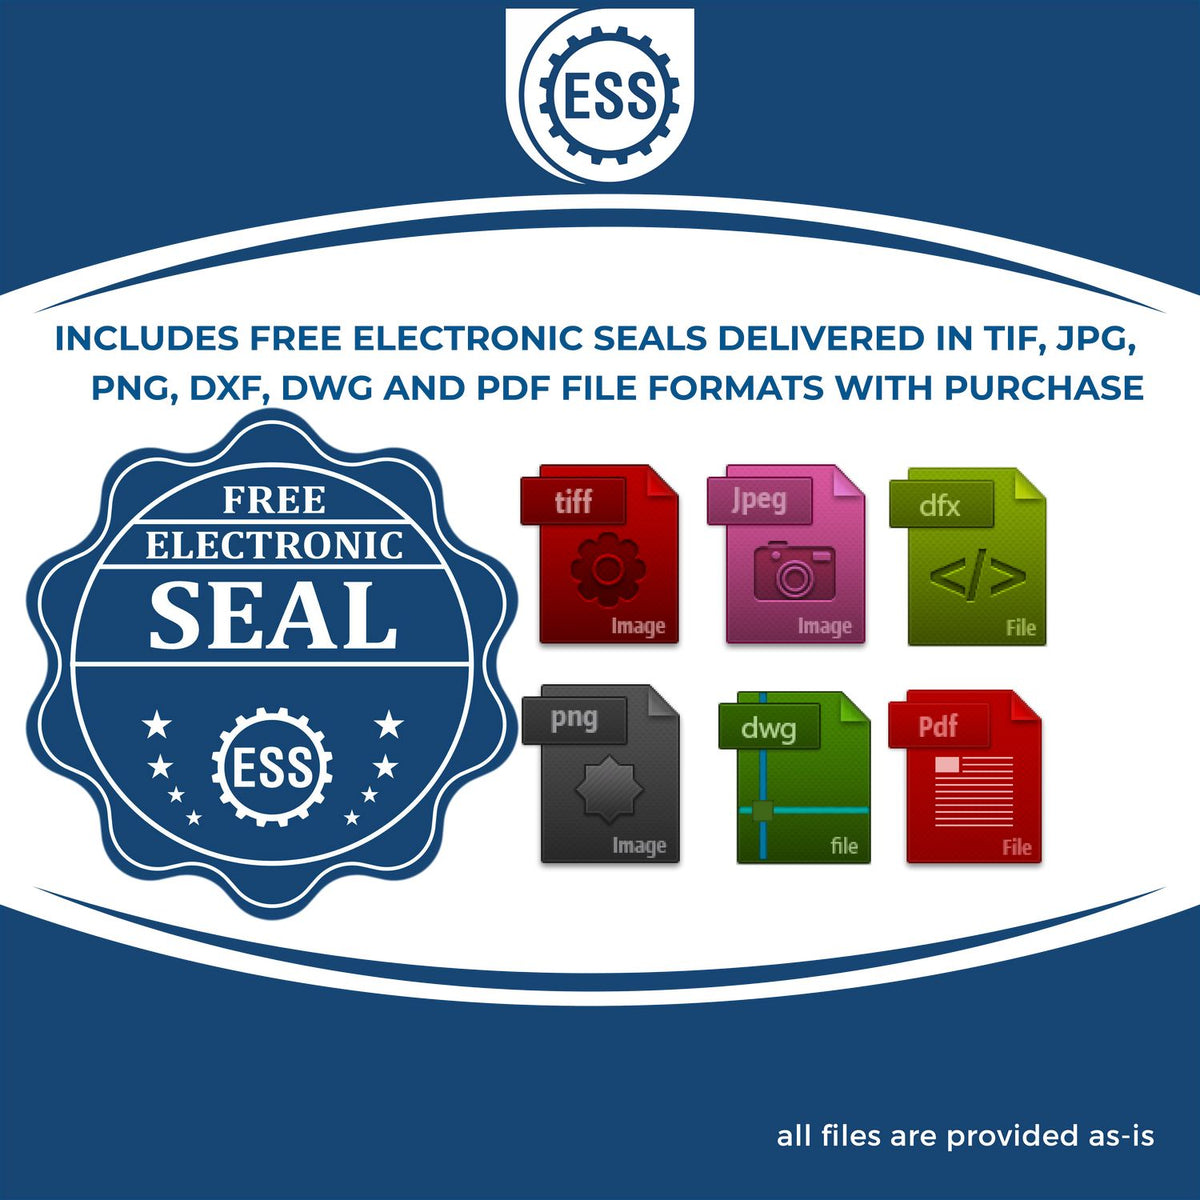 An infographic for the free electronic seal for the Connecticut Geologist Desk Seal illustrating the different file type icons such as DXF, DWG, TIF, JPG and PNG.